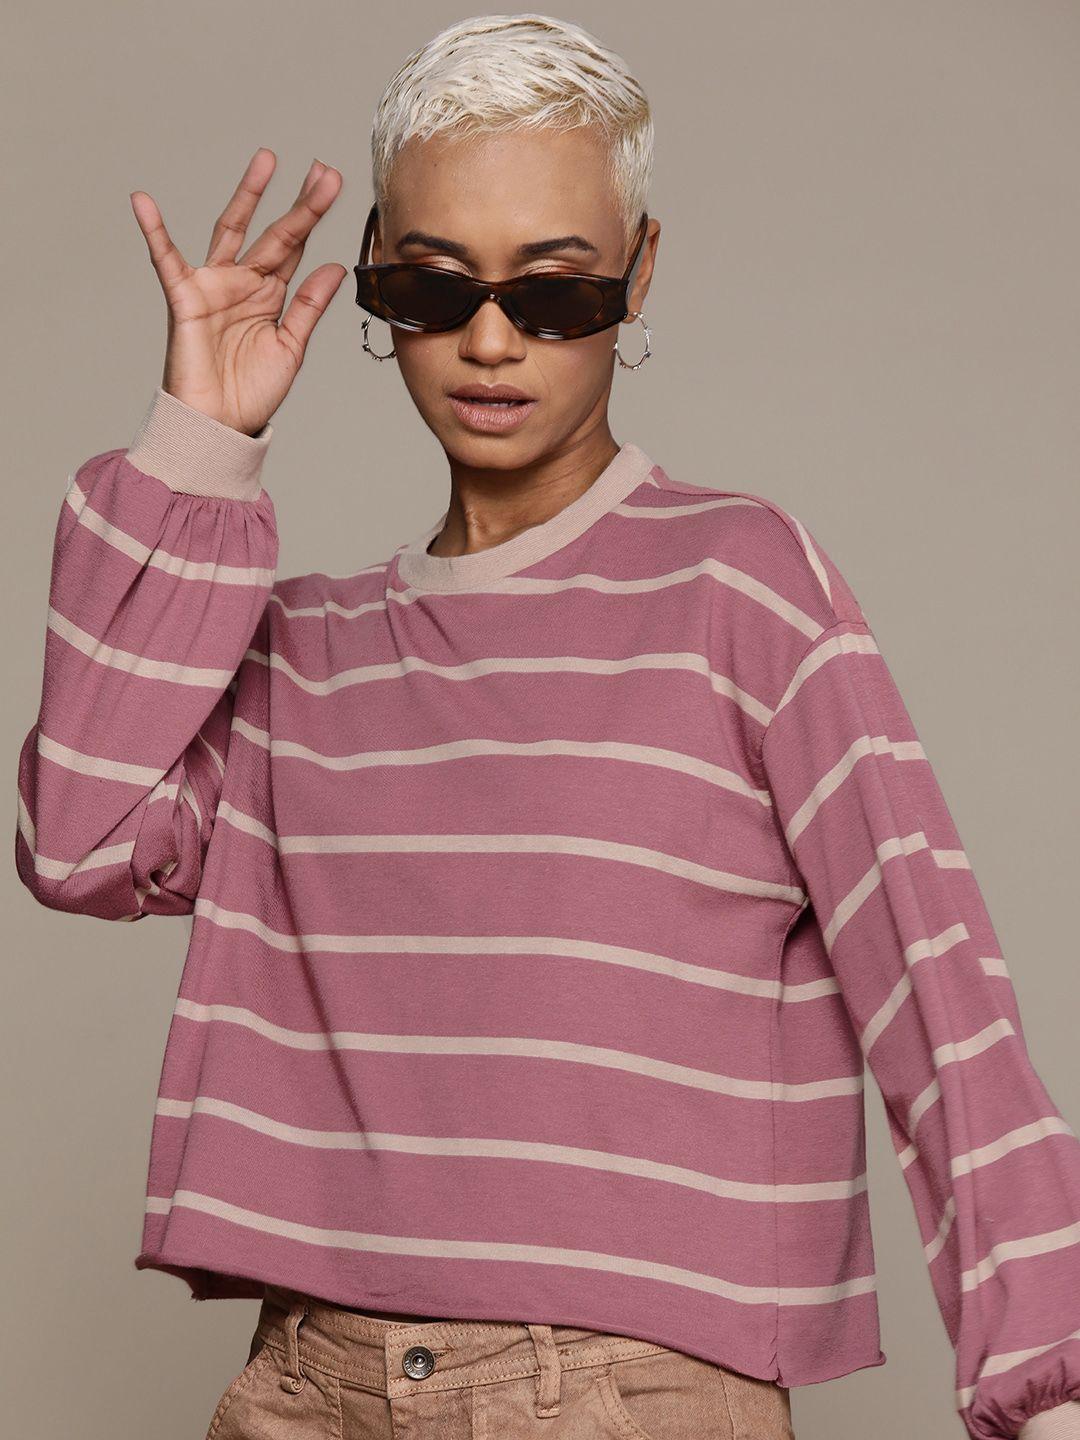 the roadster lifestyle co. full sleeves striped t-shirt